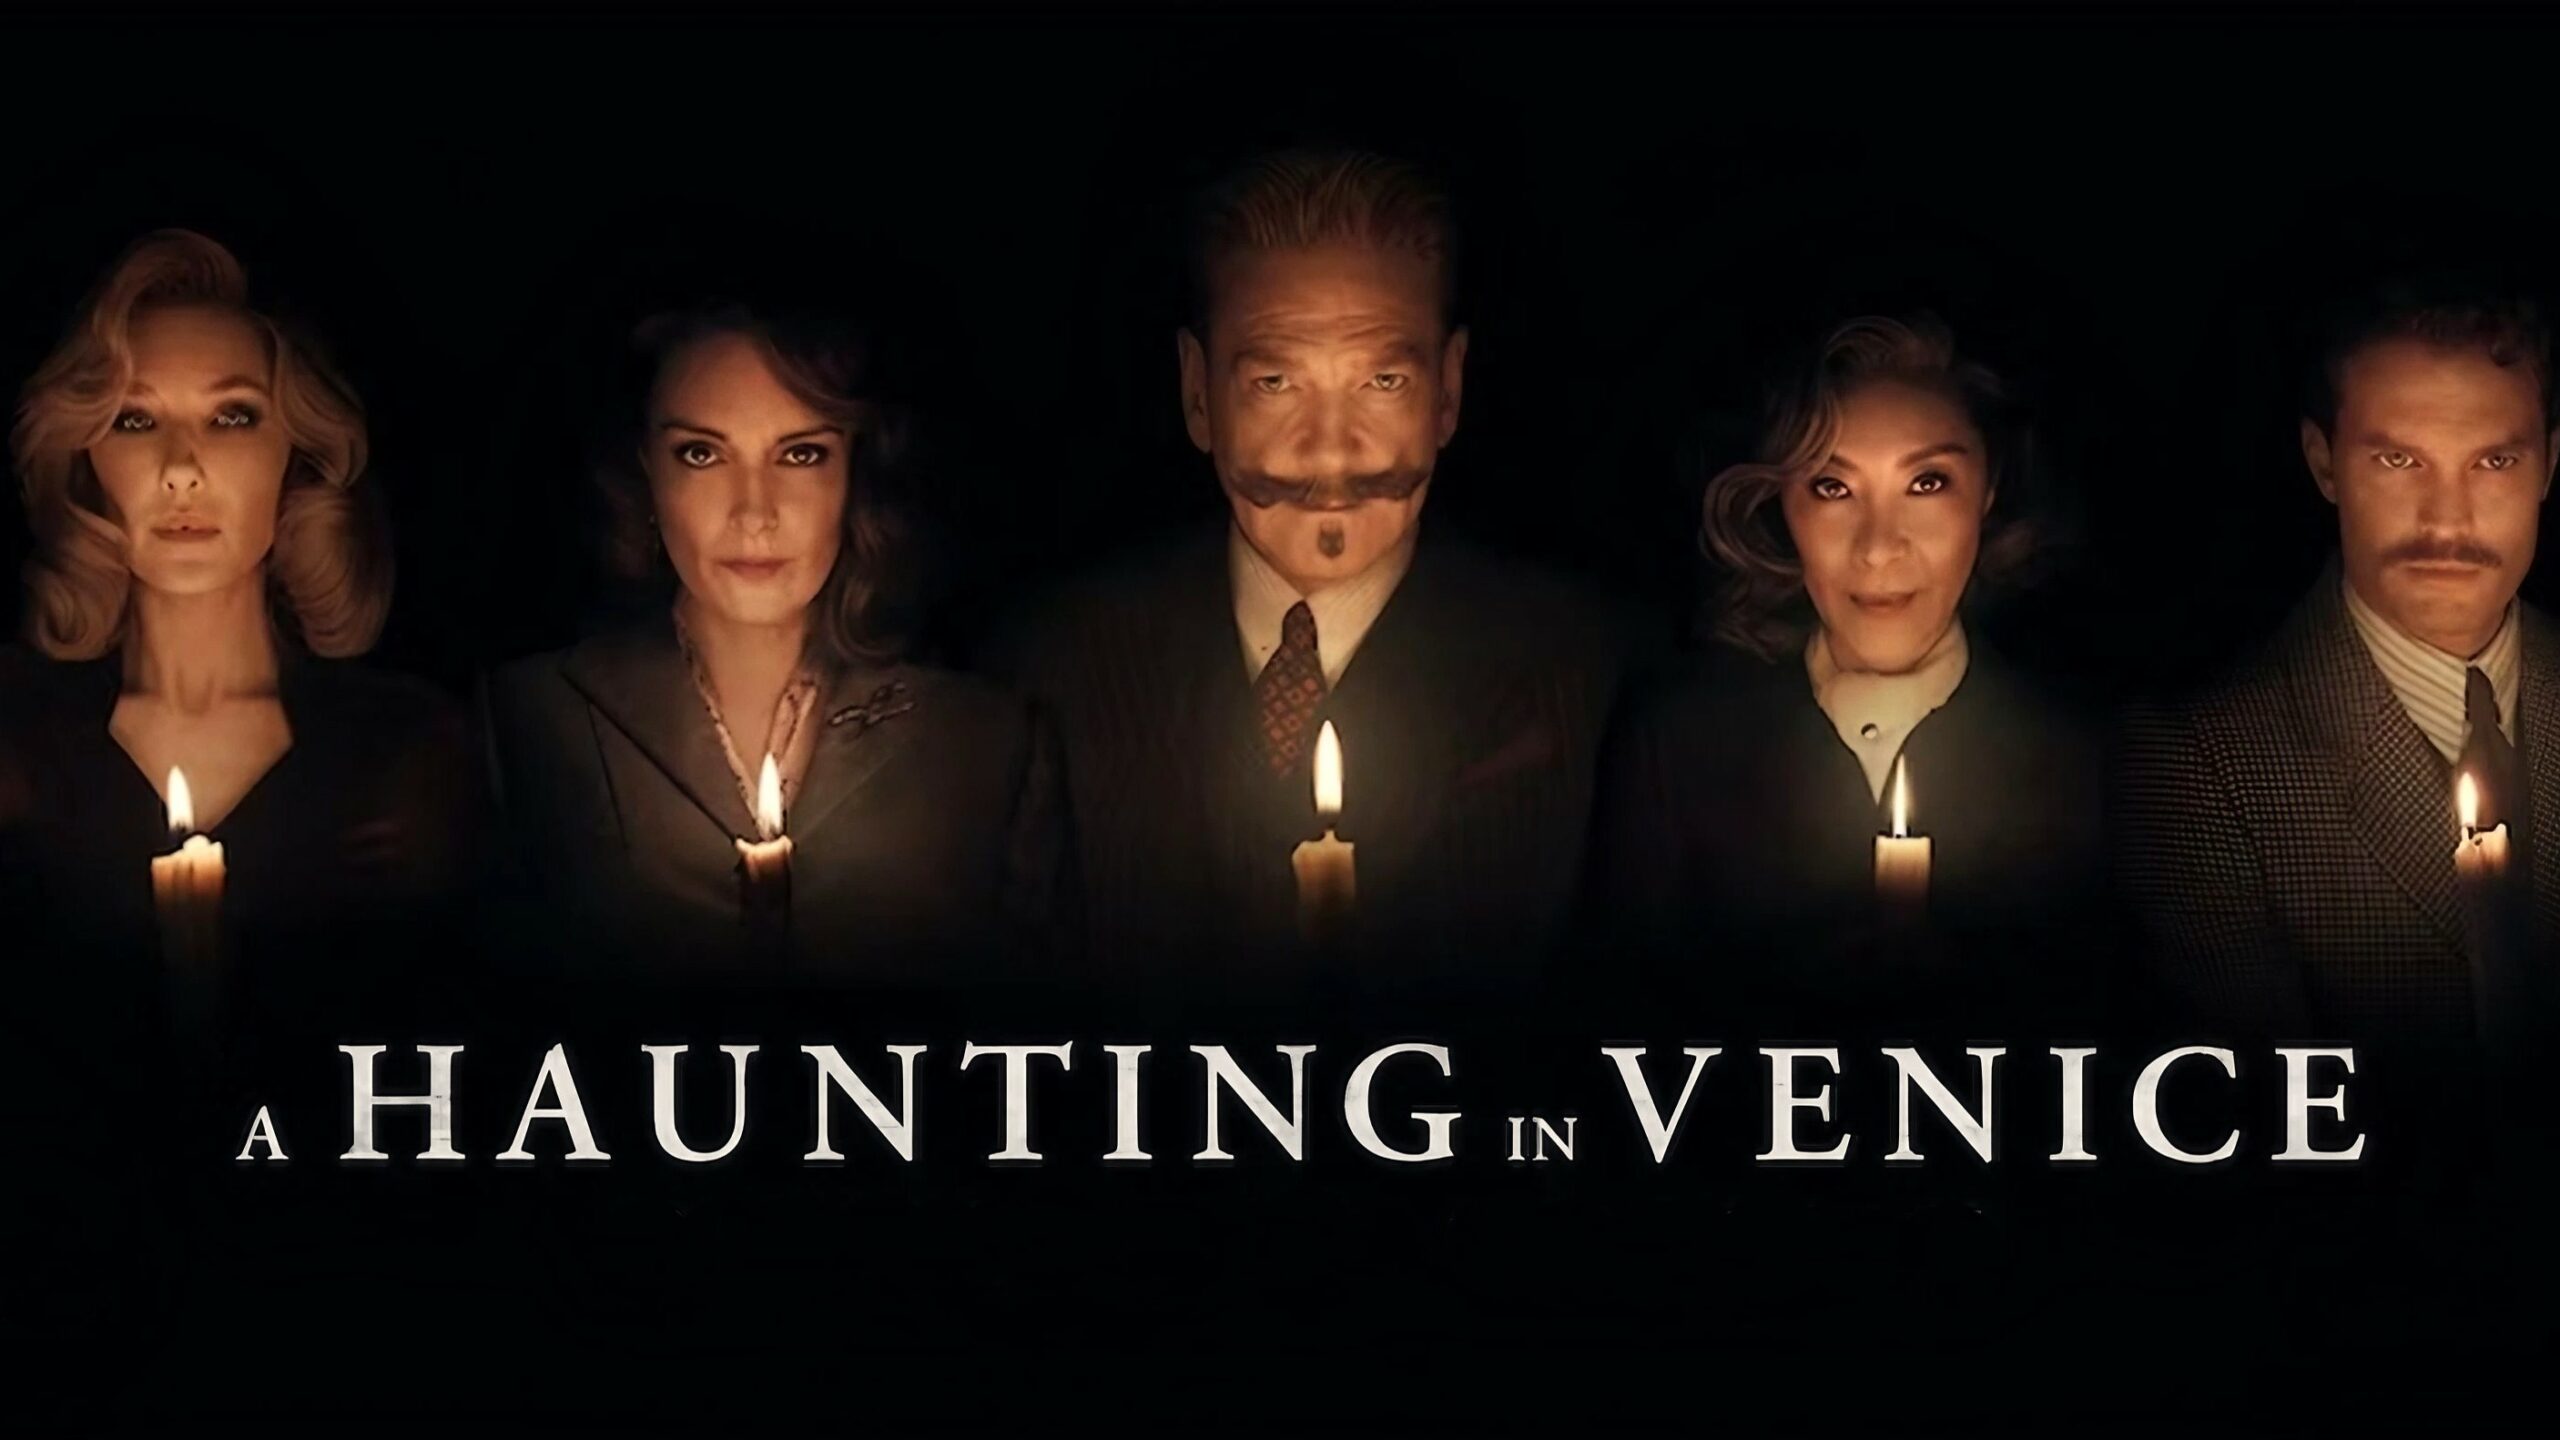 A Haunting In Venice Is Based On Which Book